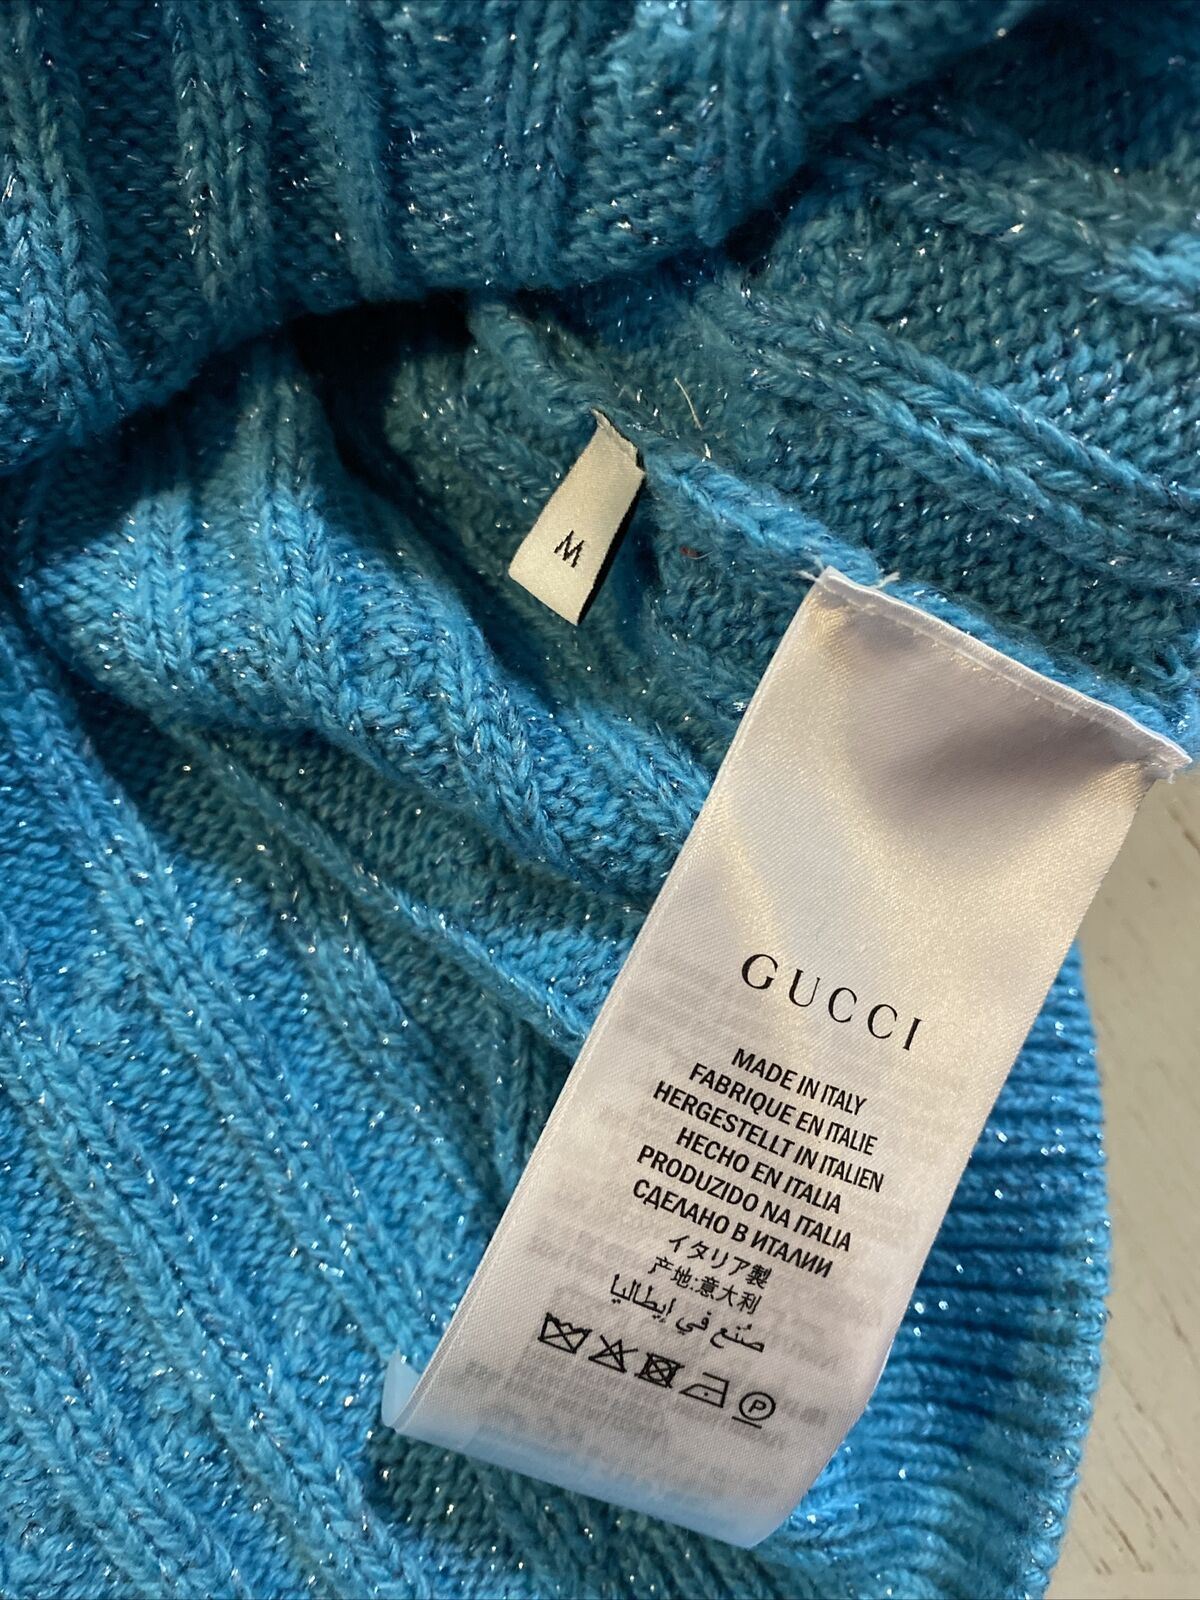 NWT $1400 Gucci Men Wool/Cashmere Crewneck Sweater Azure ( Blue ) M Italy